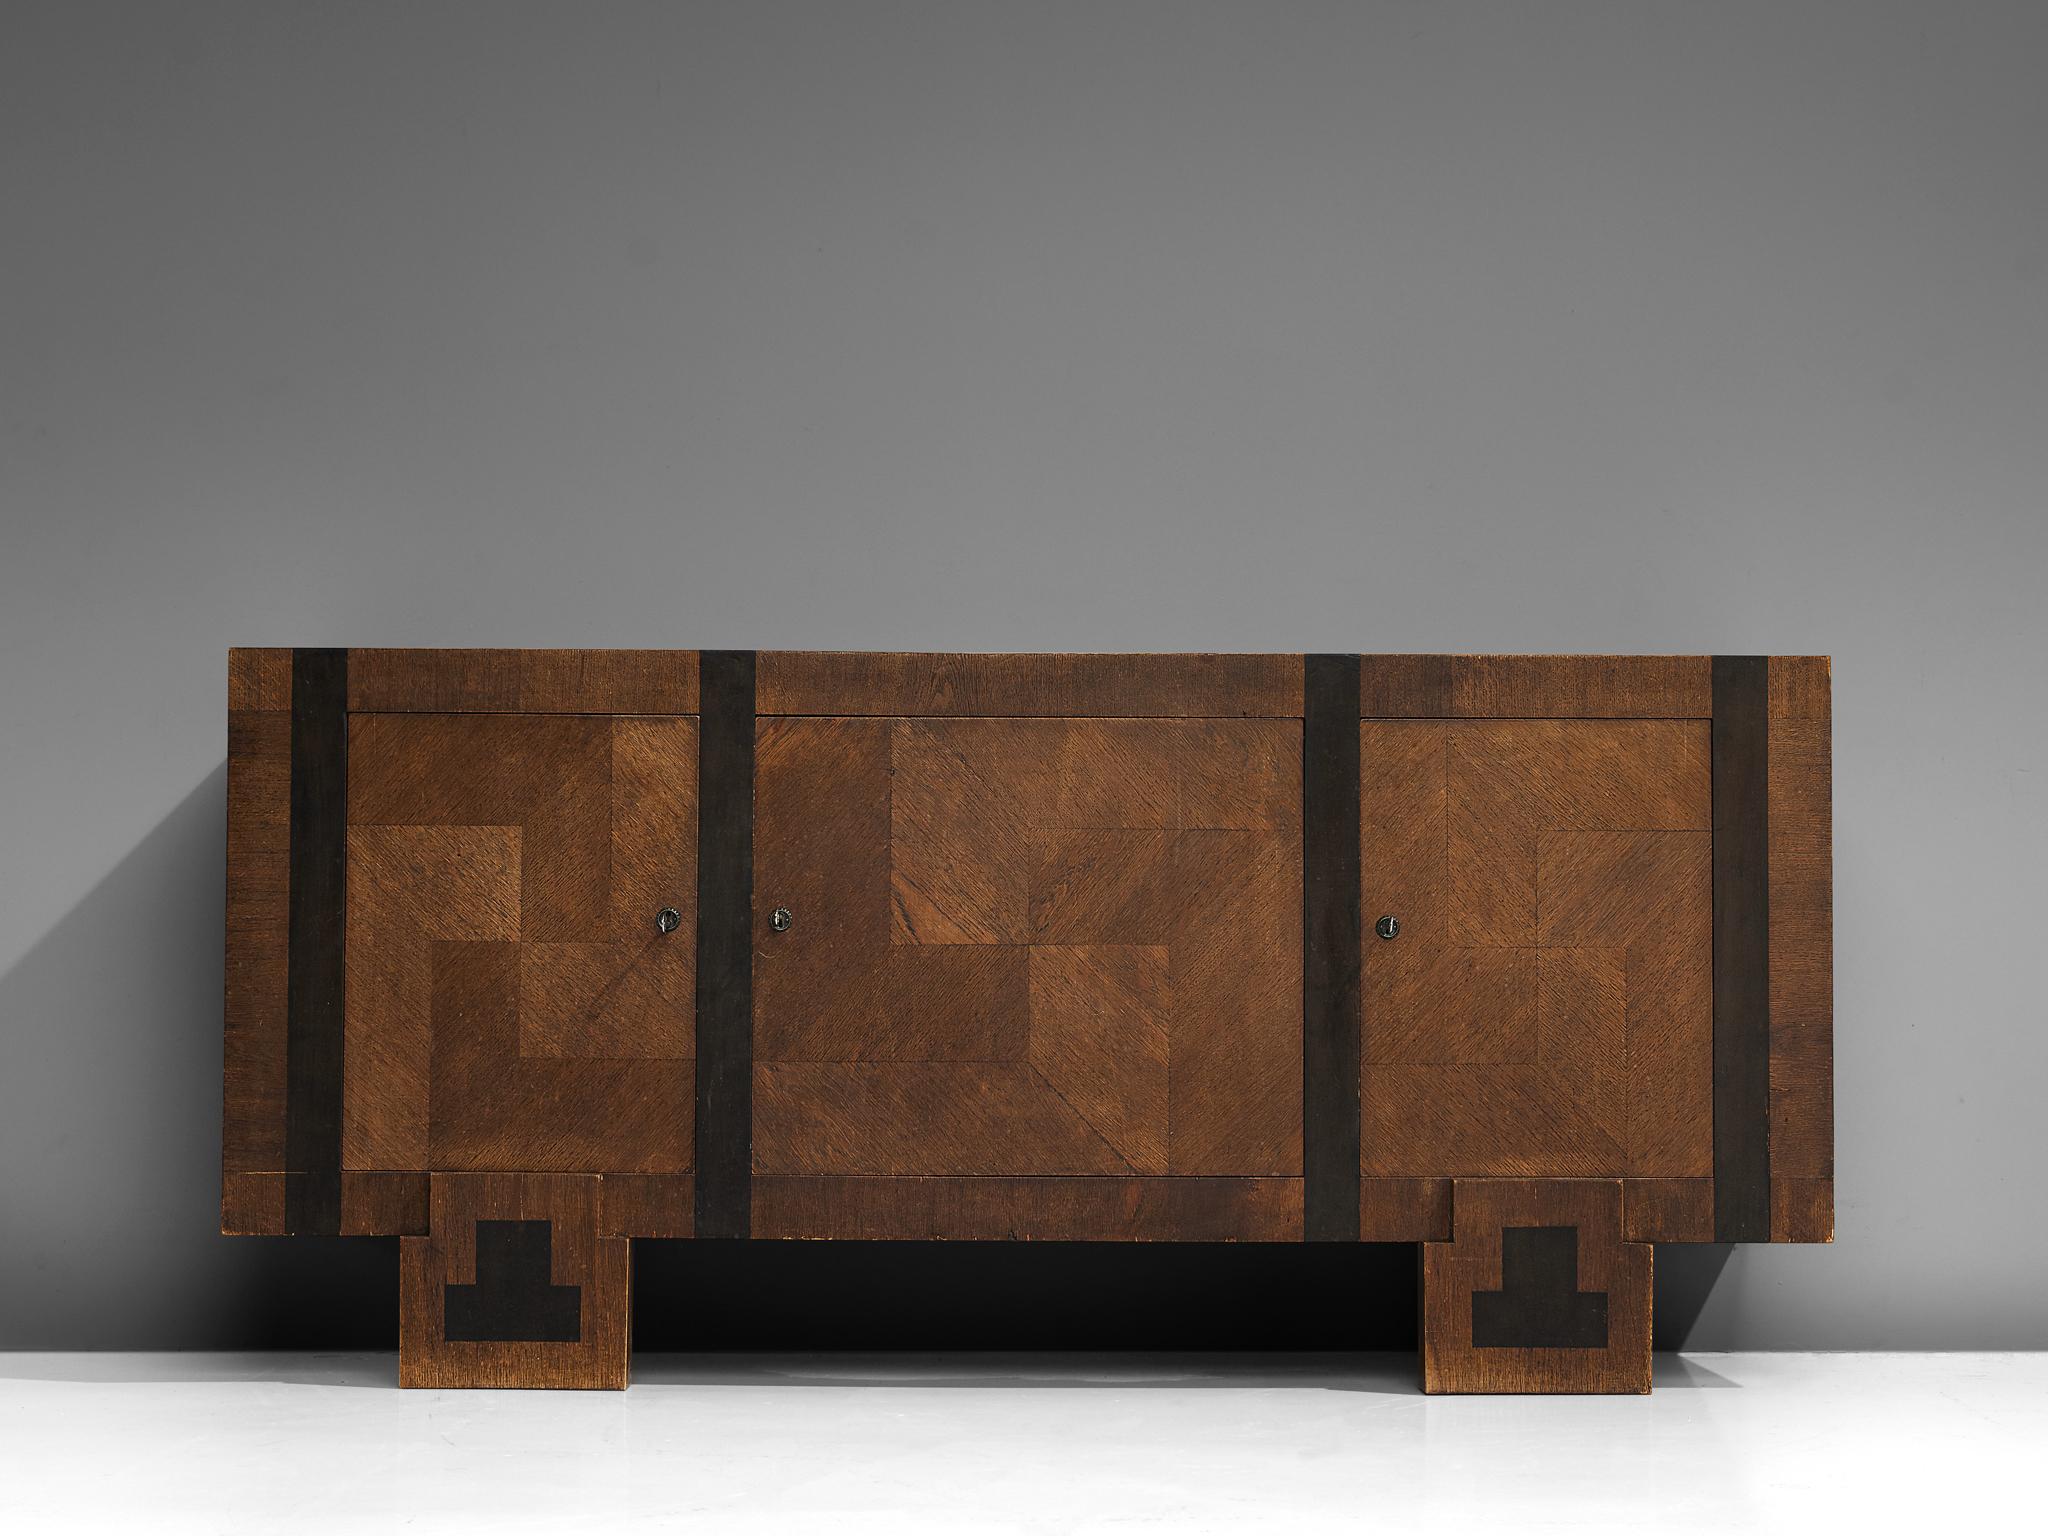 Sideboard or credenza, oak, brass, Finland, 1930s 

This sideboard of Finnish origin is characterized by a cubic shaped construction inlayed with dark vertical lines and a pattern of stained oak inlays. Therefore, the front gets an appealing,